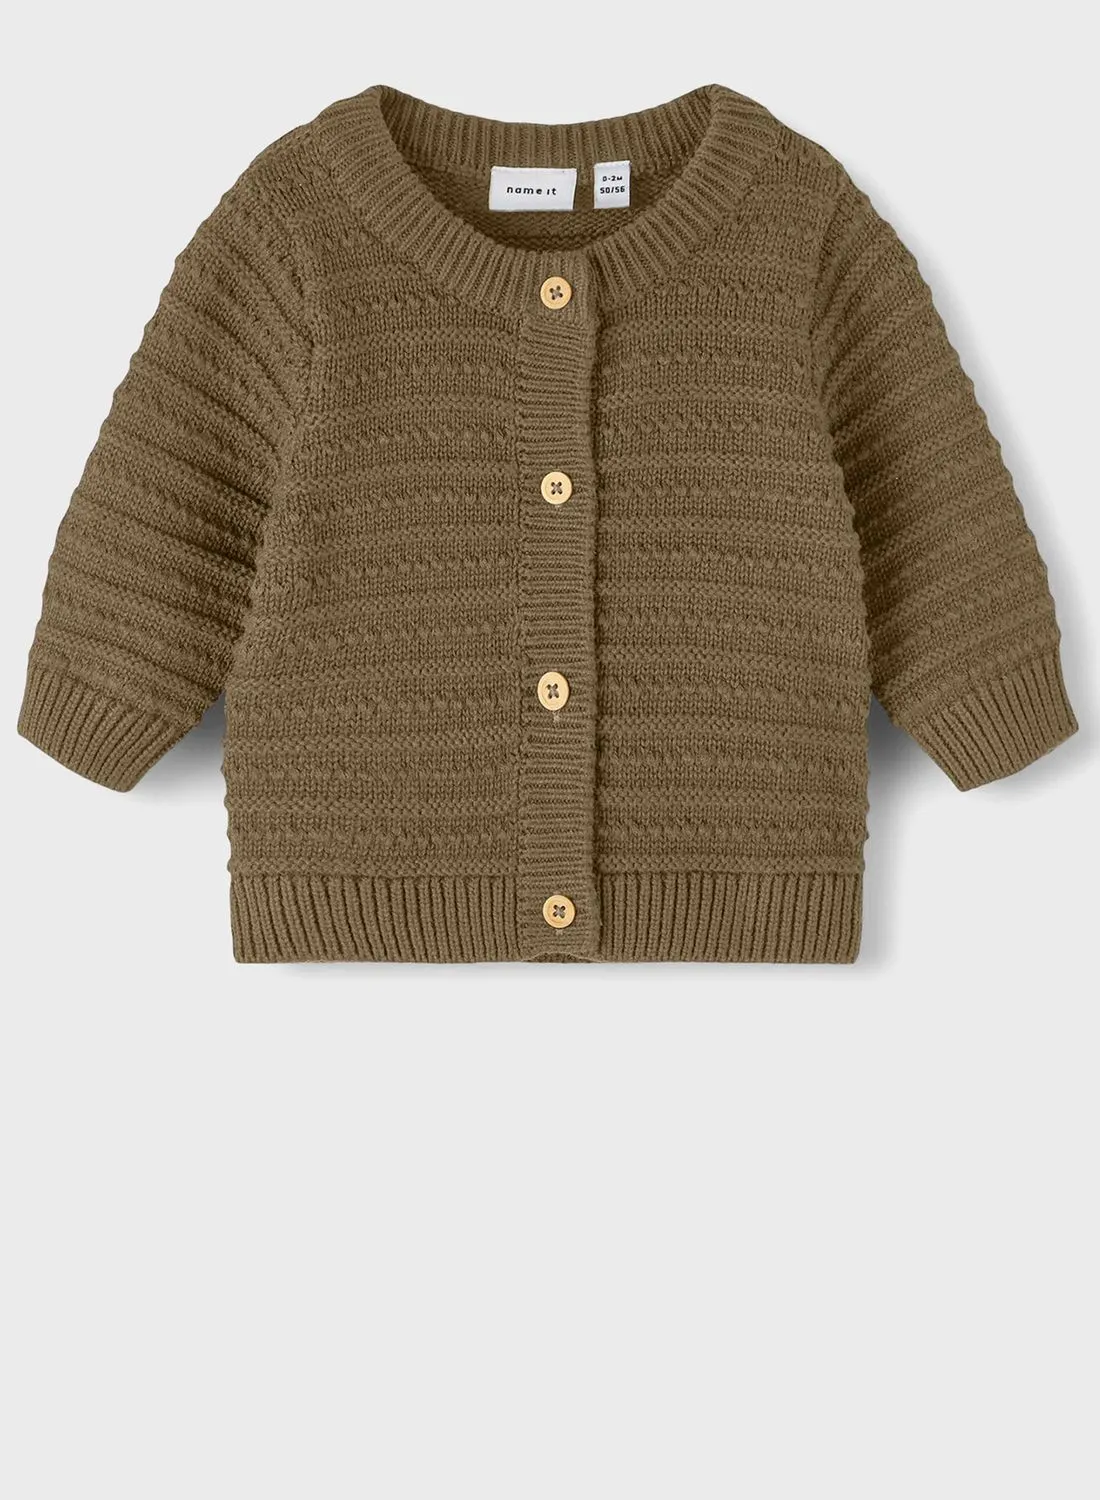 NAME IT Kids Knitted Cardigan